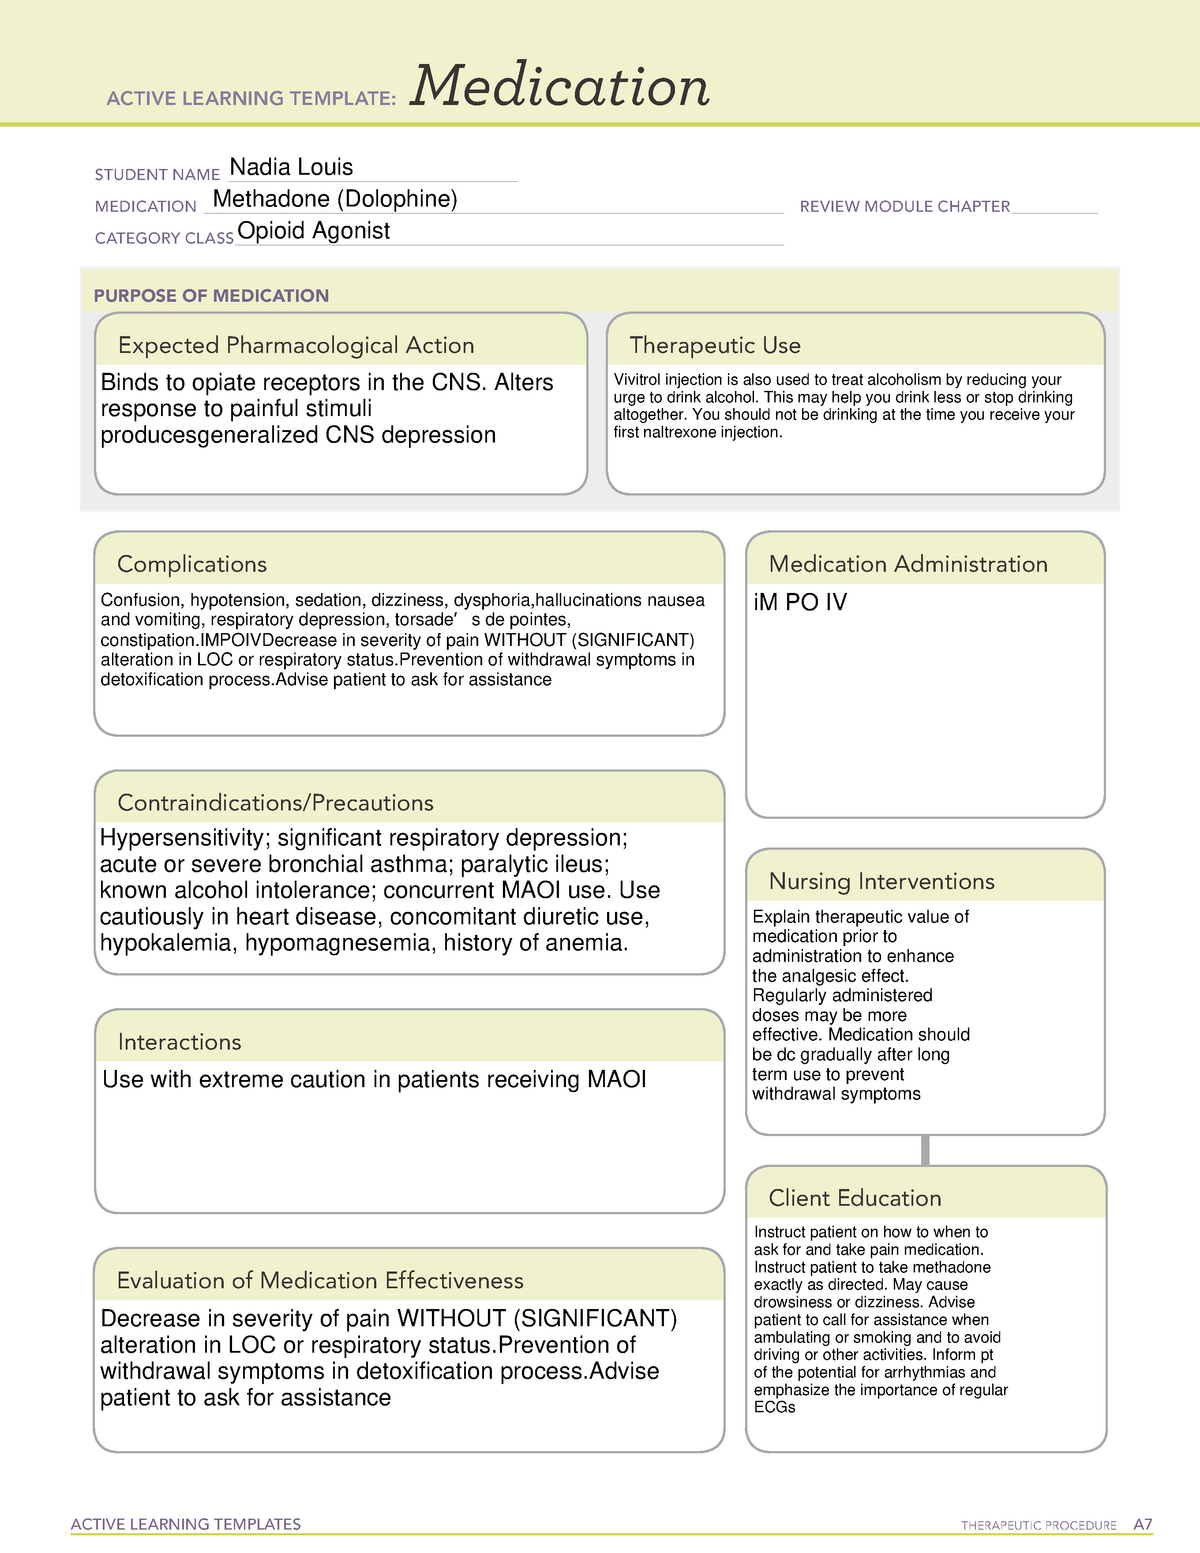 Methadone Using the ATI Active Learning Medication Template and ATI